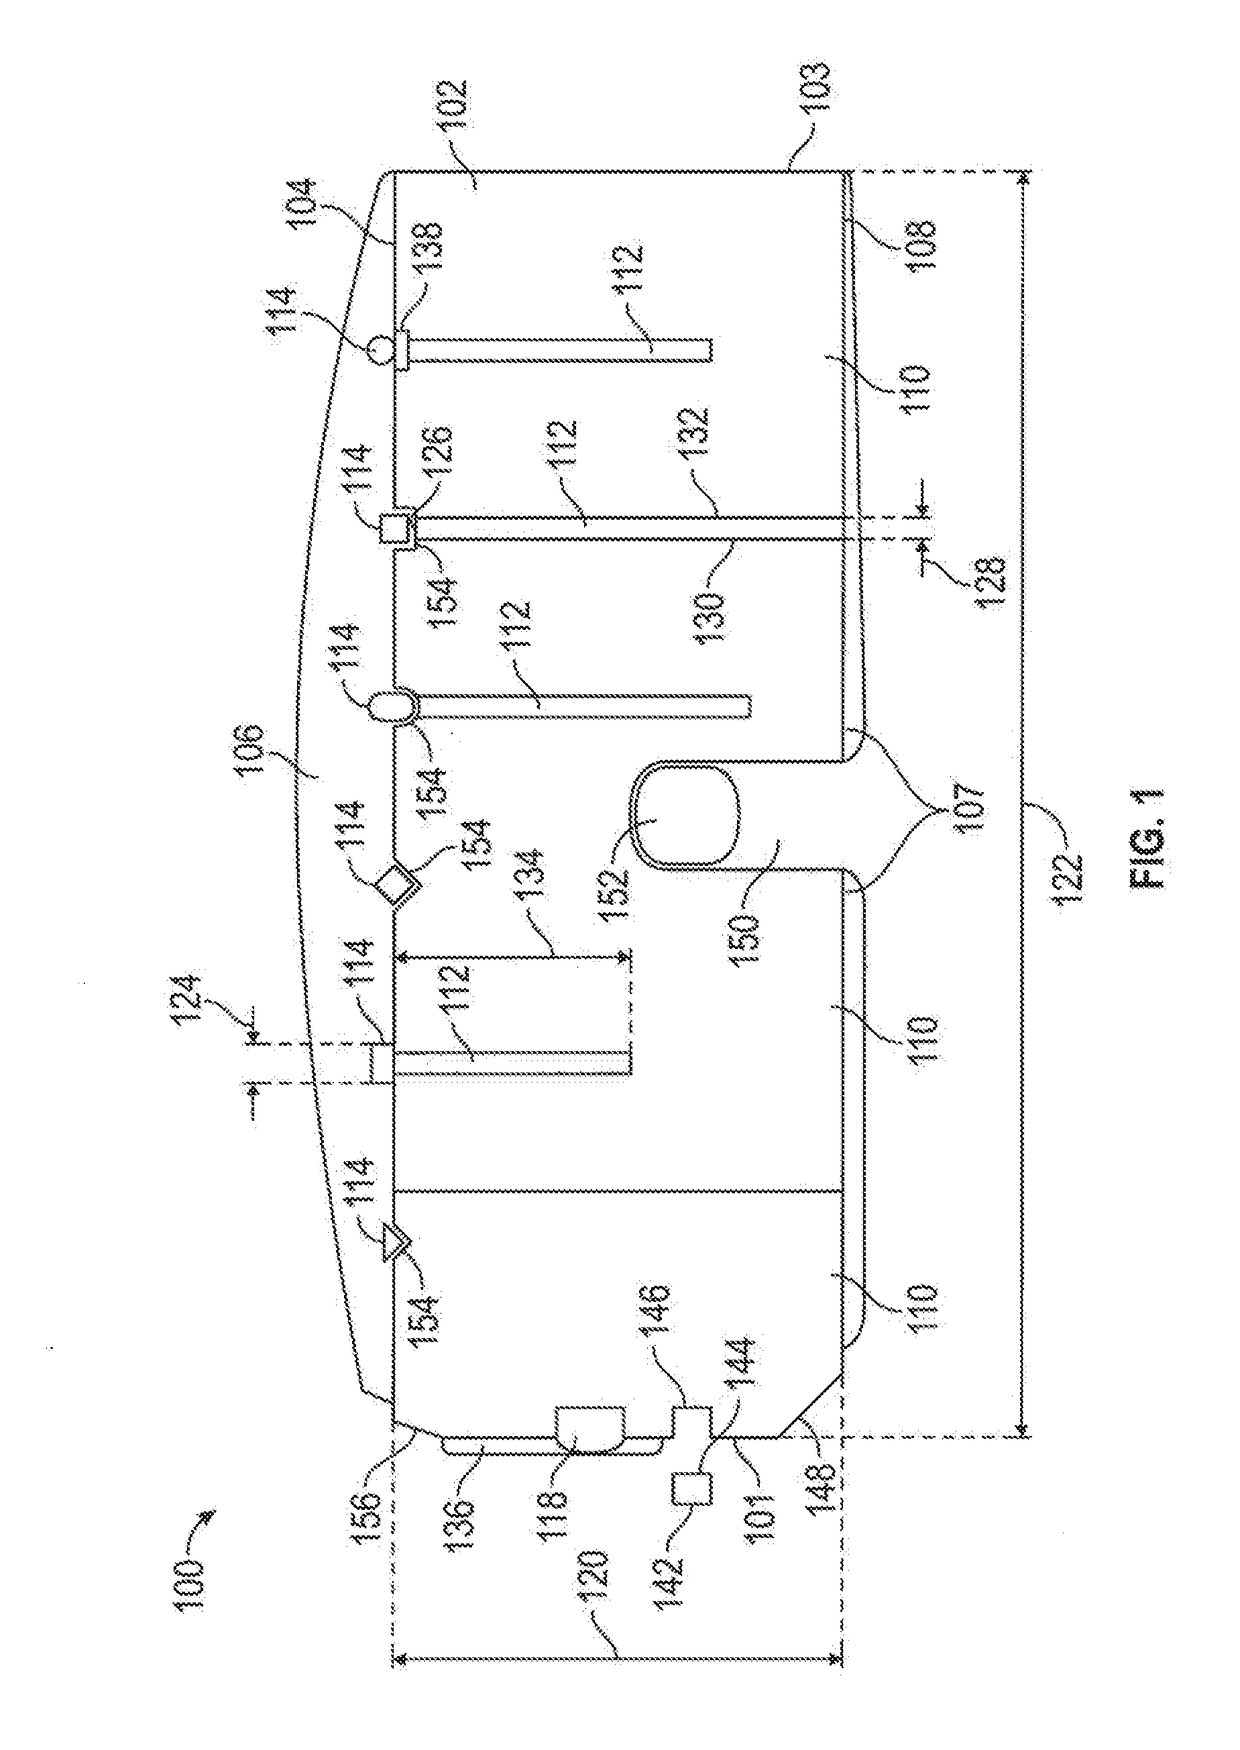 Expansion Joint Seal with surface load transfer and intumescent